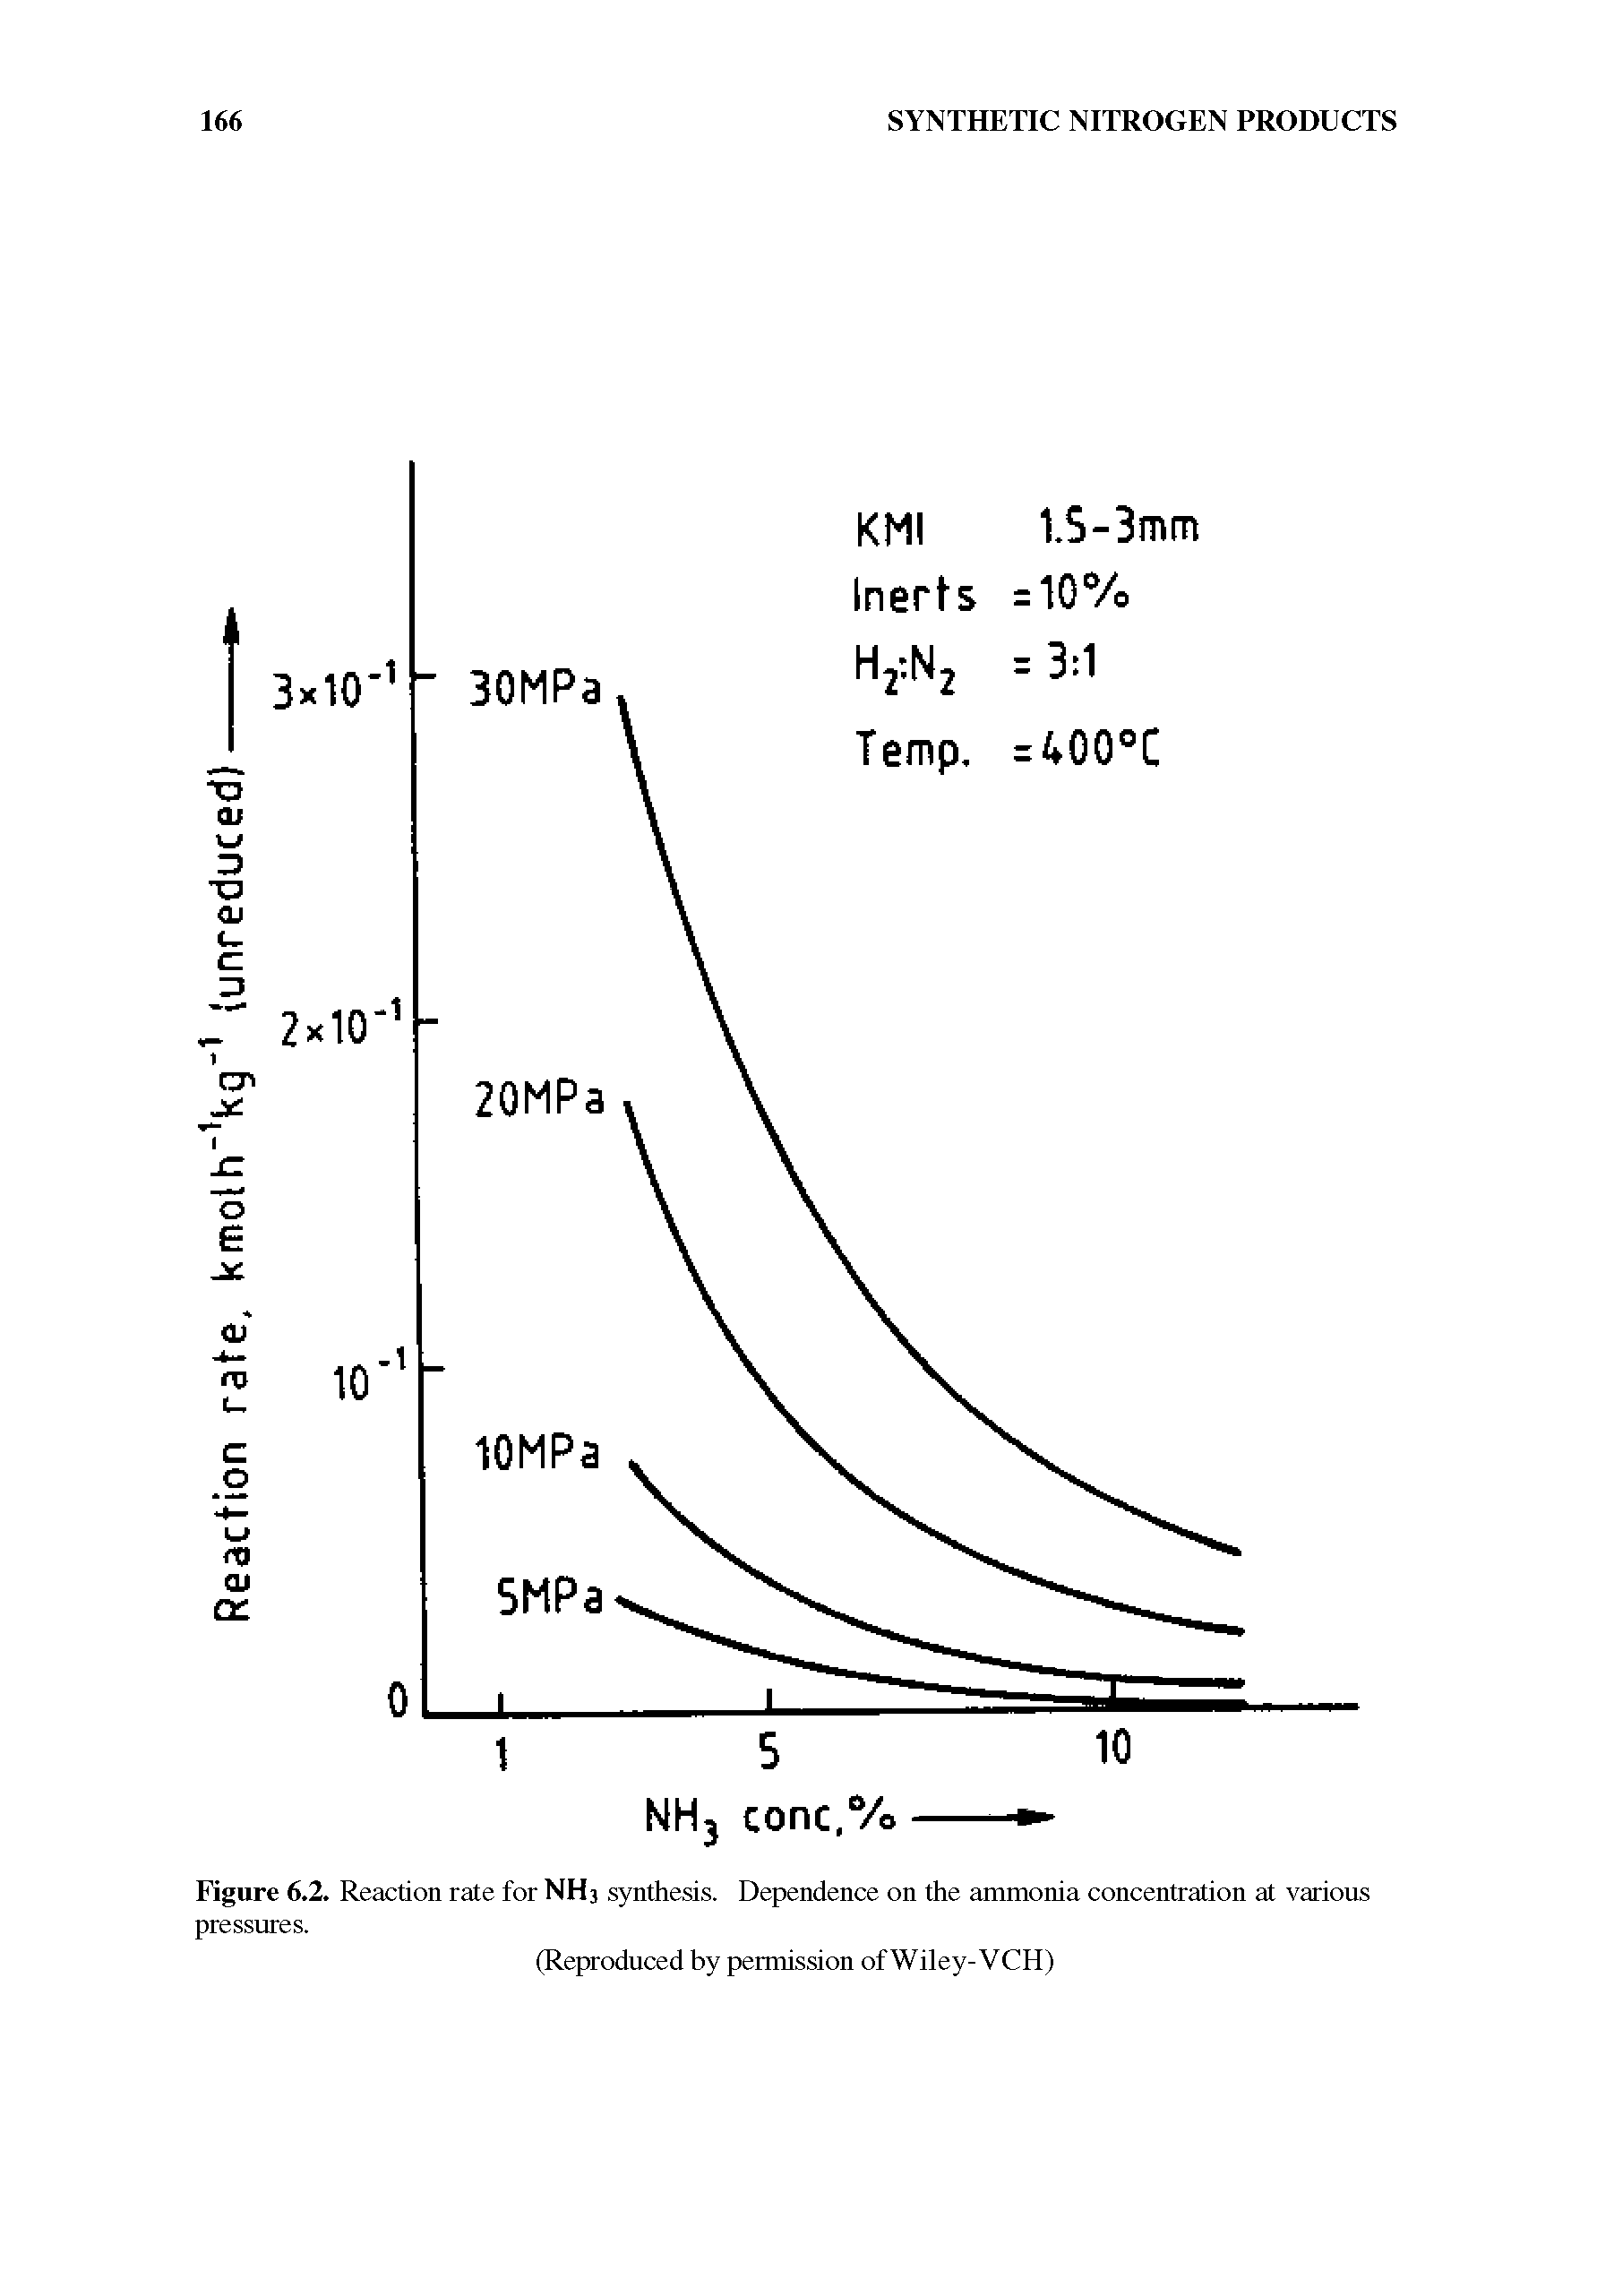 Figure 6.2. Reaction rate for NH3 synthesis. Dependence on the ammonia concentration at various pressures.